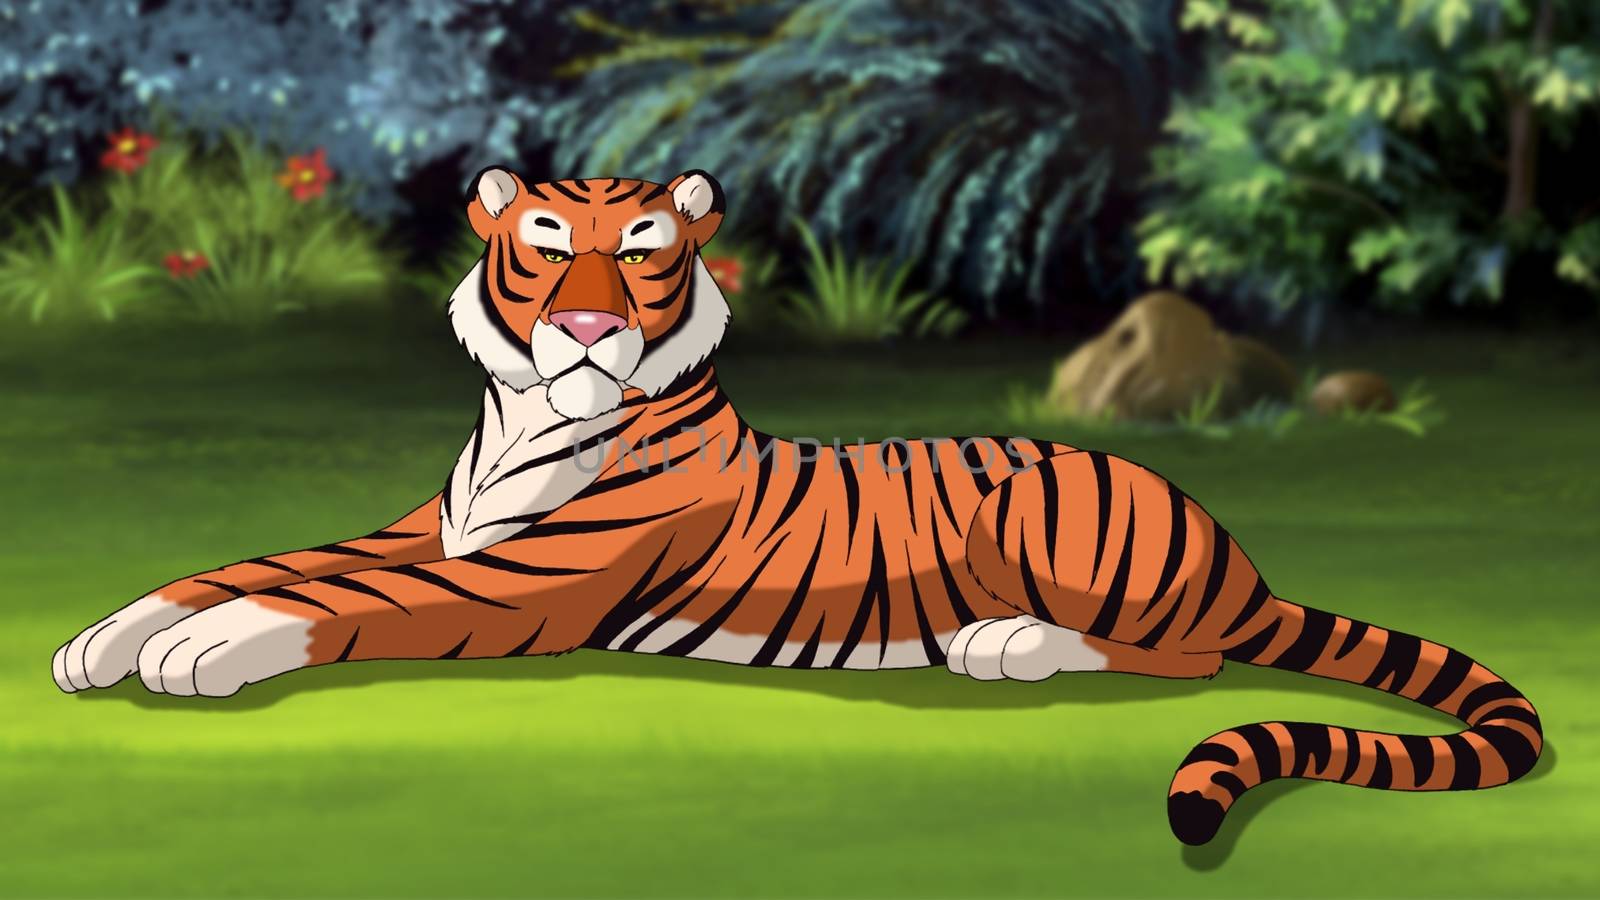 Bengal Tiger Image by Multipedia